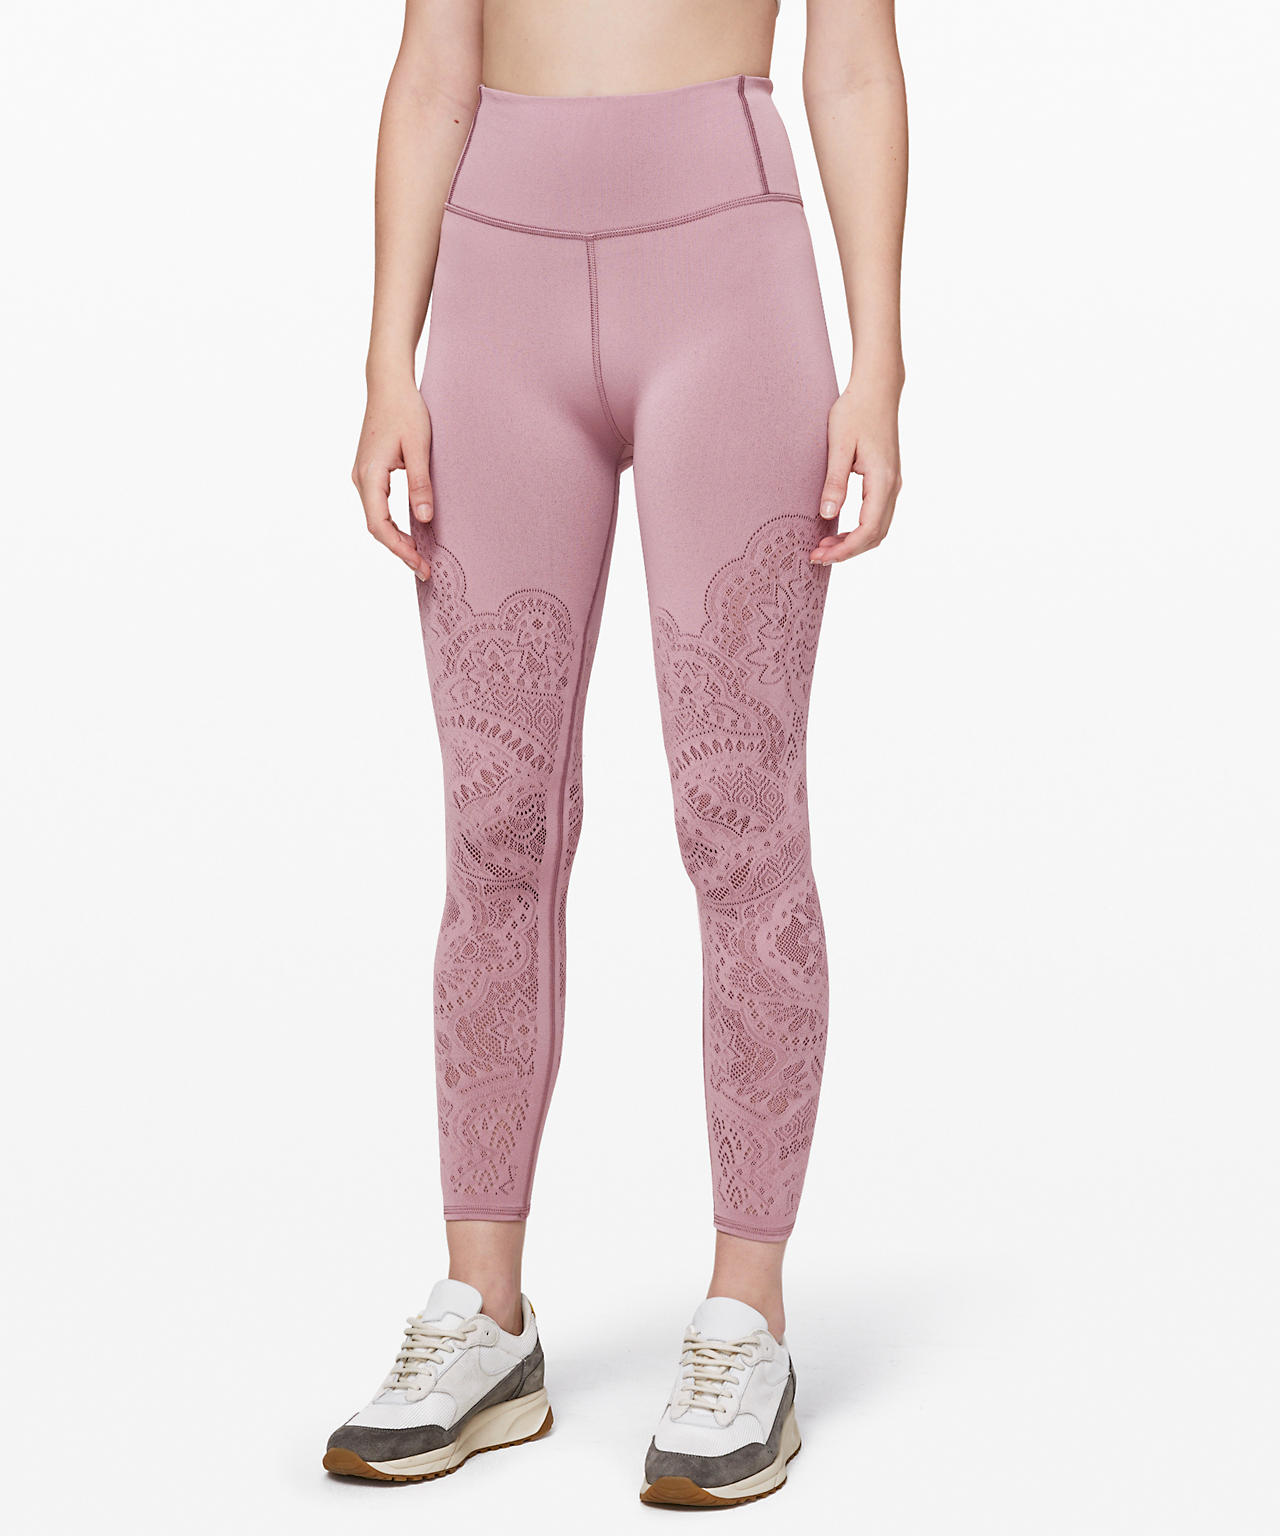 lululemon reveal tight review